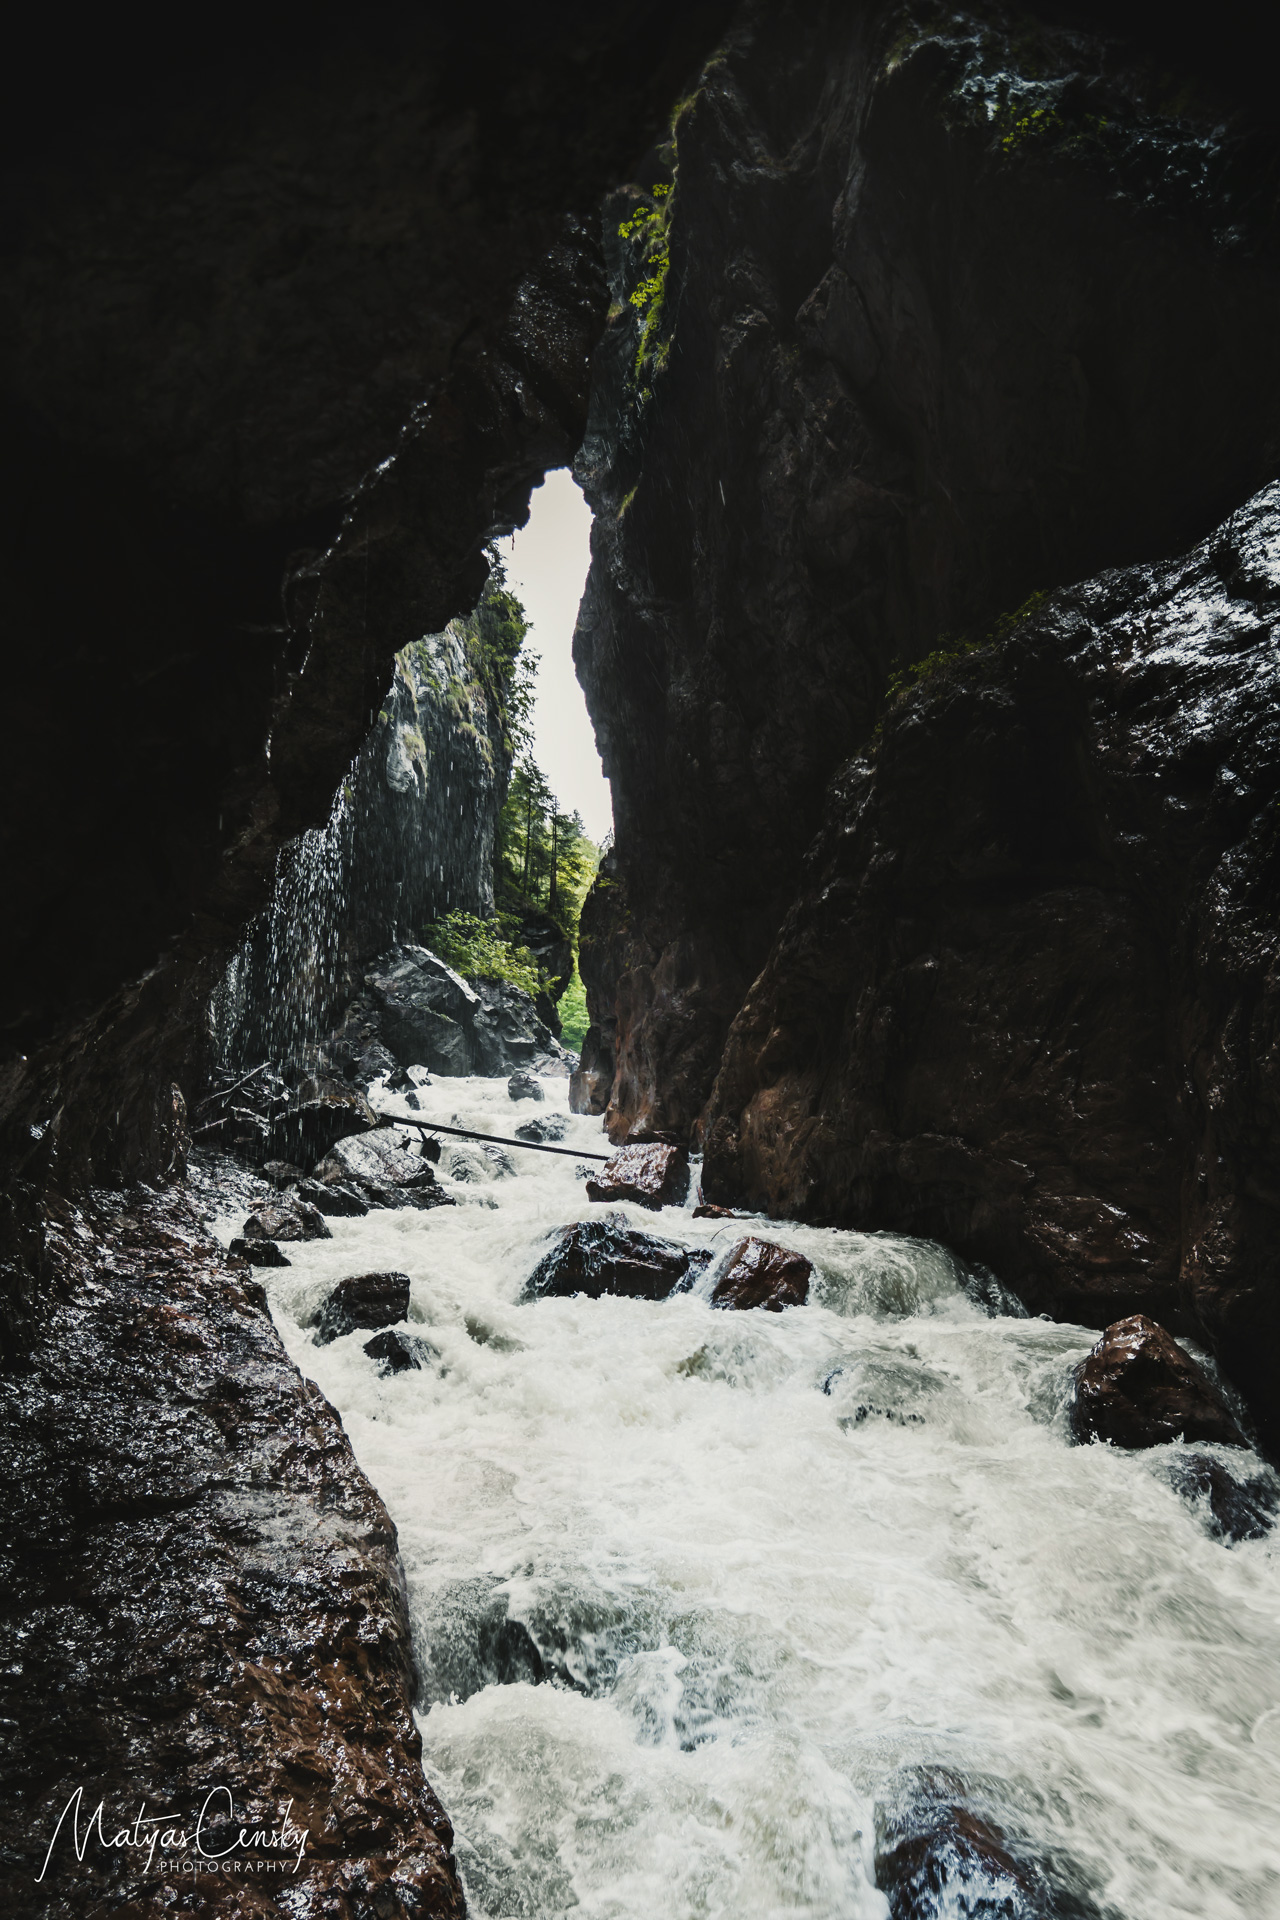 Photo of a wild river in a canyon, taken from the canyon right next to the white waters in Partnachklamm, Austria.